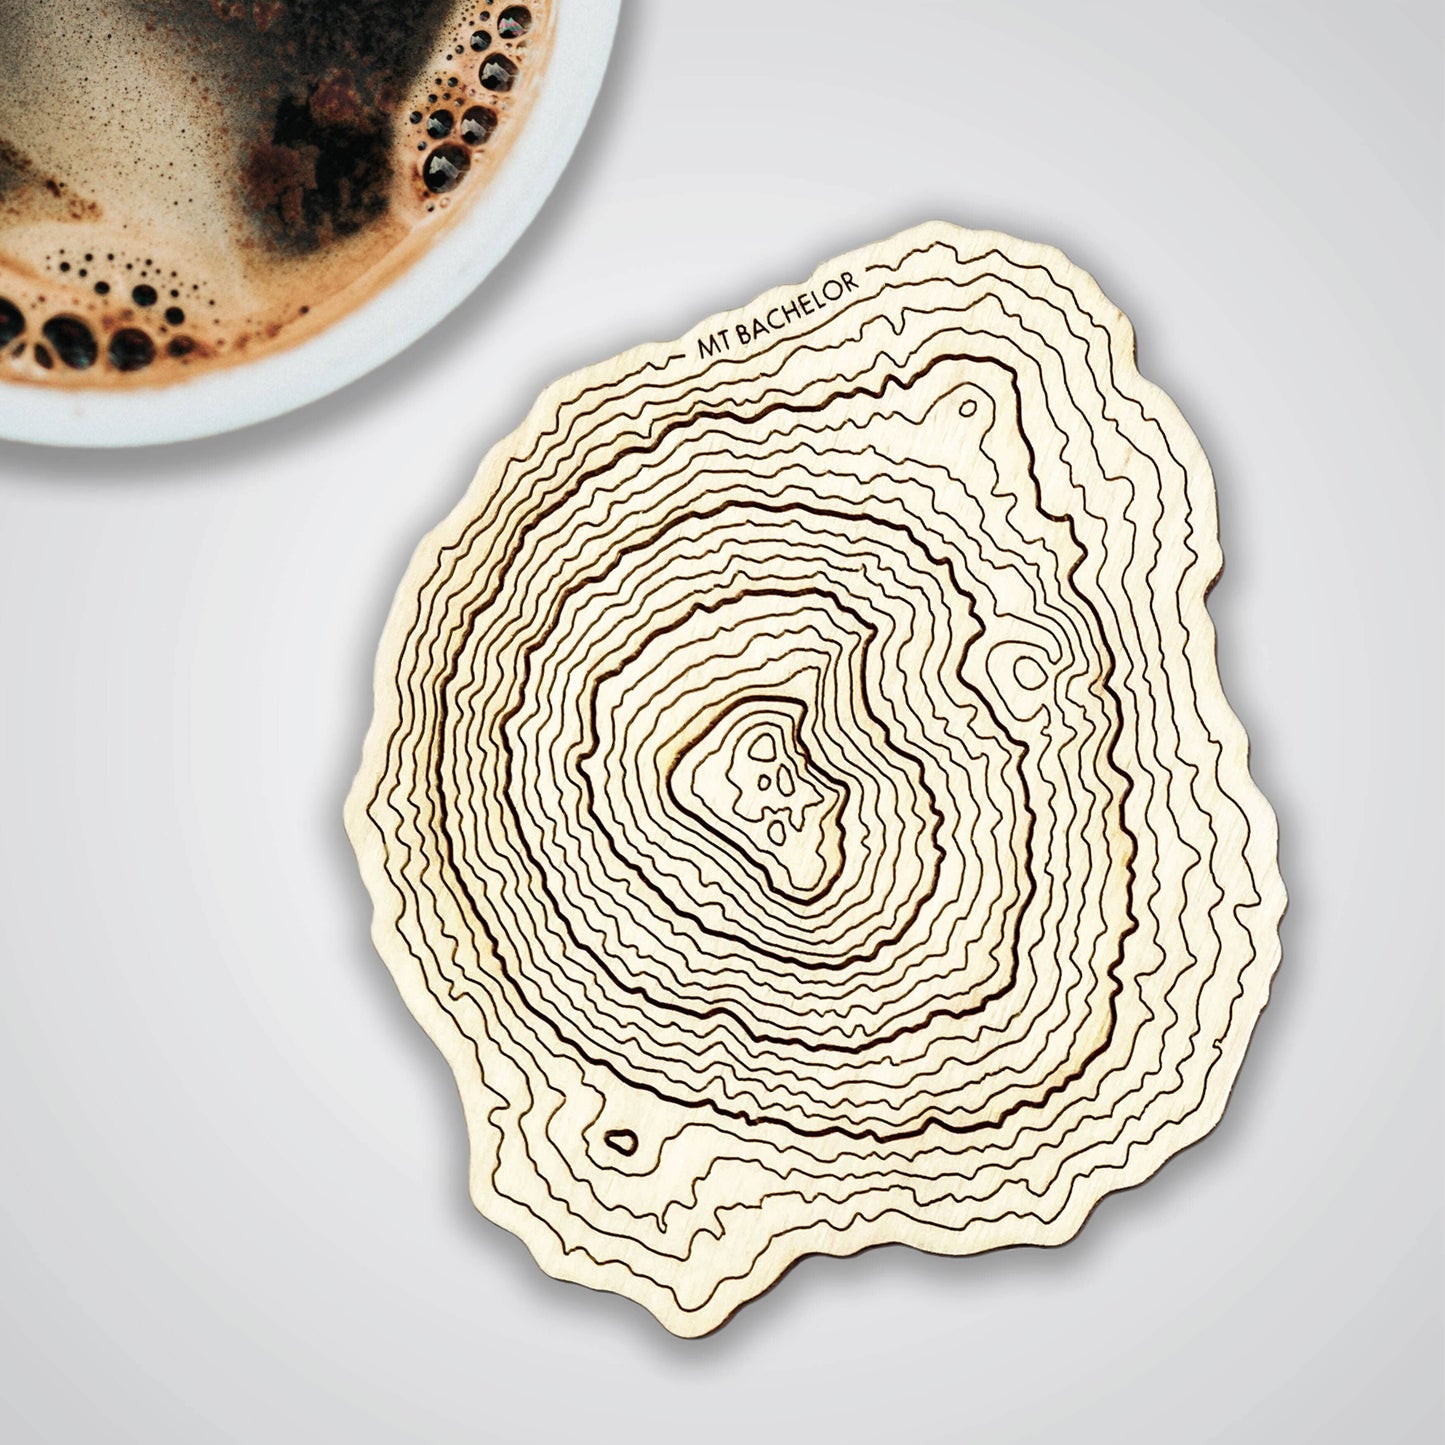 SML | Simple Modern Living - OR Volcanoes Topography Coasters - Set of 4